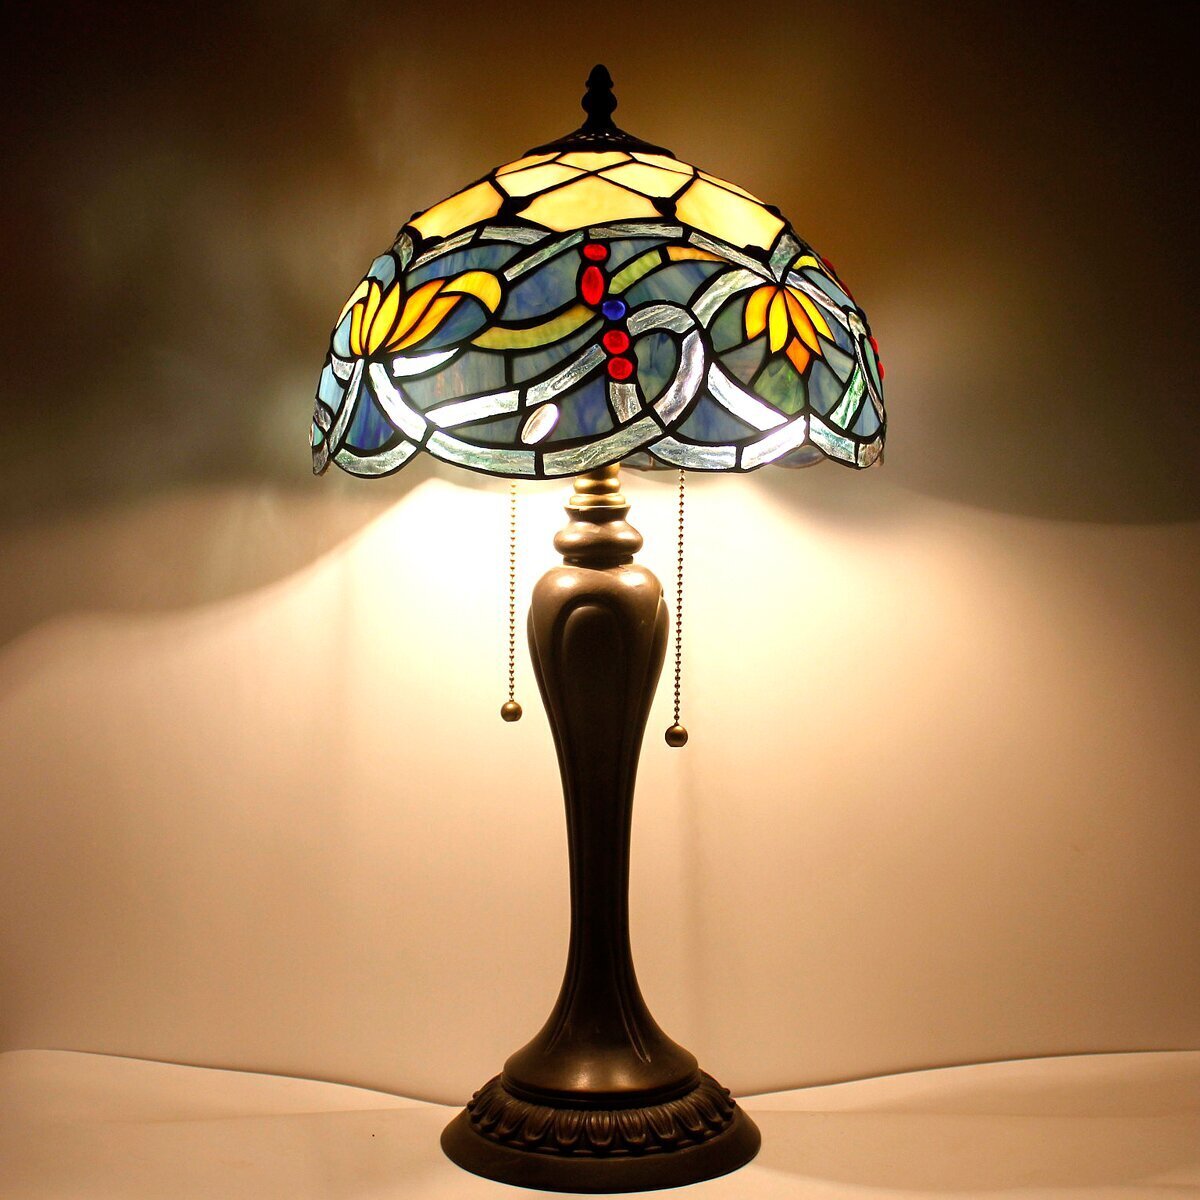 Elegant lotus Tiffany lamp in a cold palette